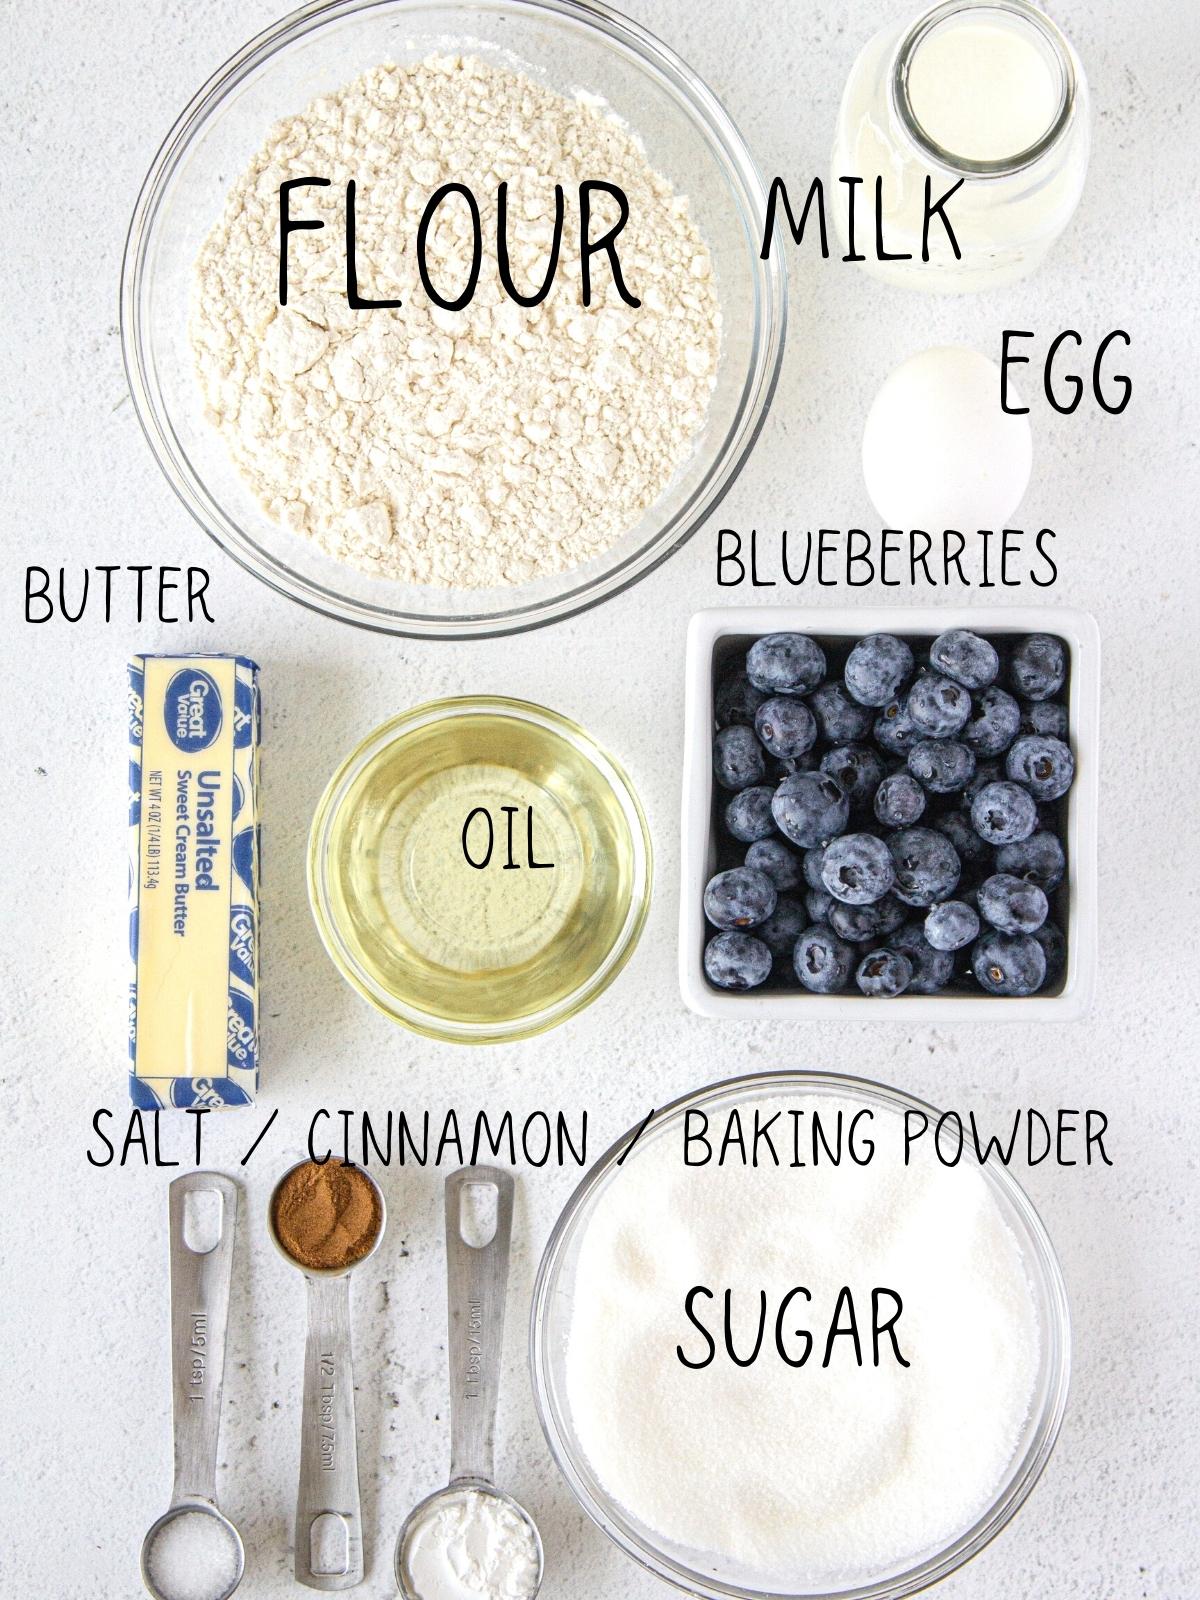 ingredients for starbucks muffins, including blueberries, butter, sugar, flour, milk, cinnamon and egg